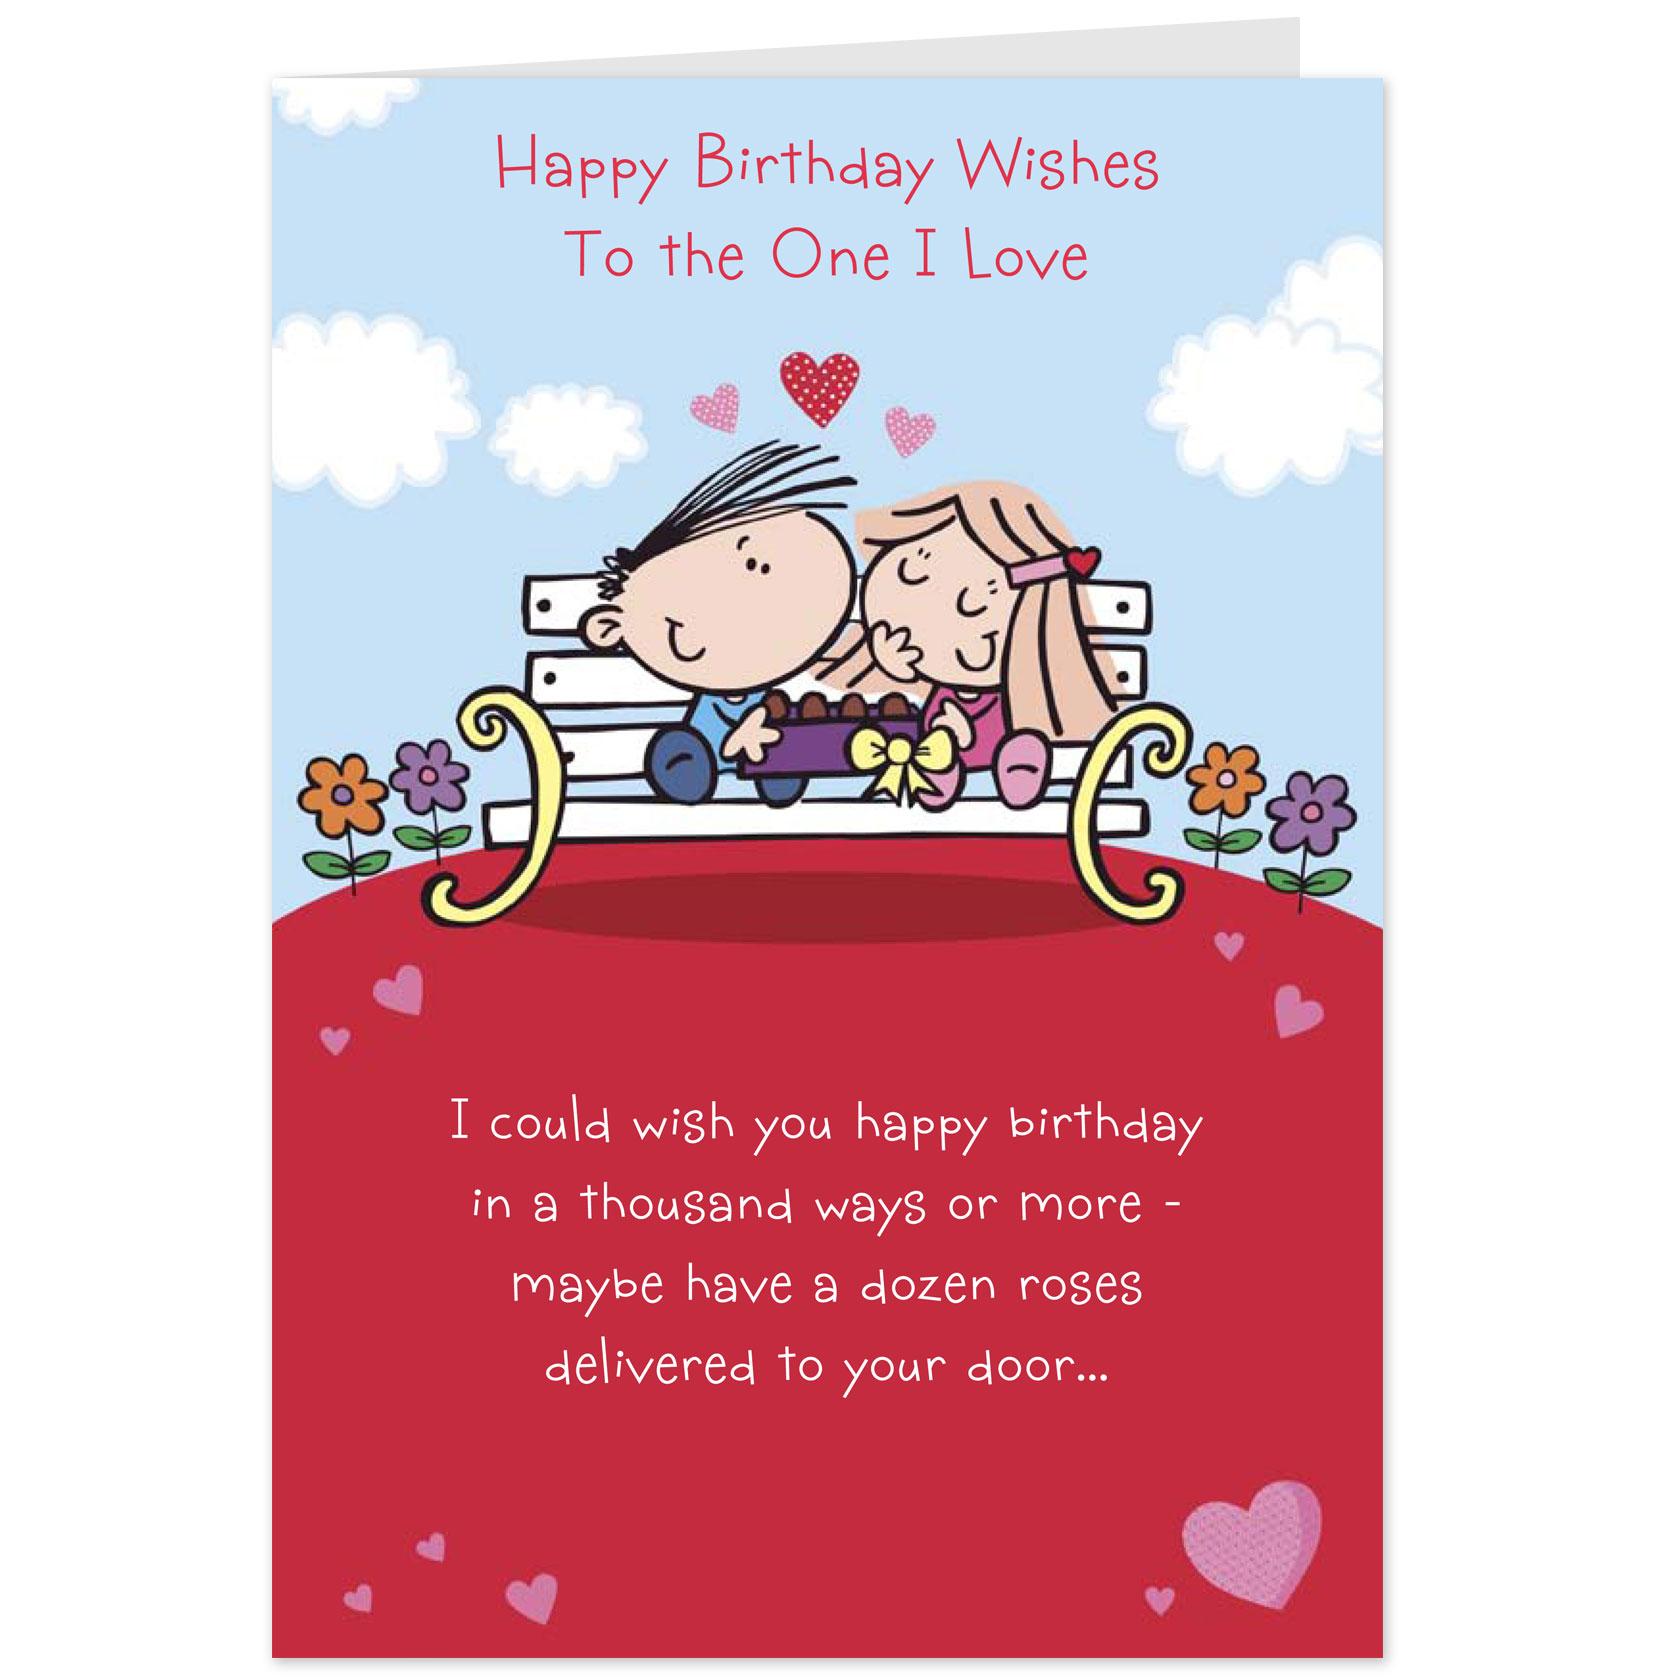 Funny Birthday Card for boyfriend husband humorous amusing quote Love quote 